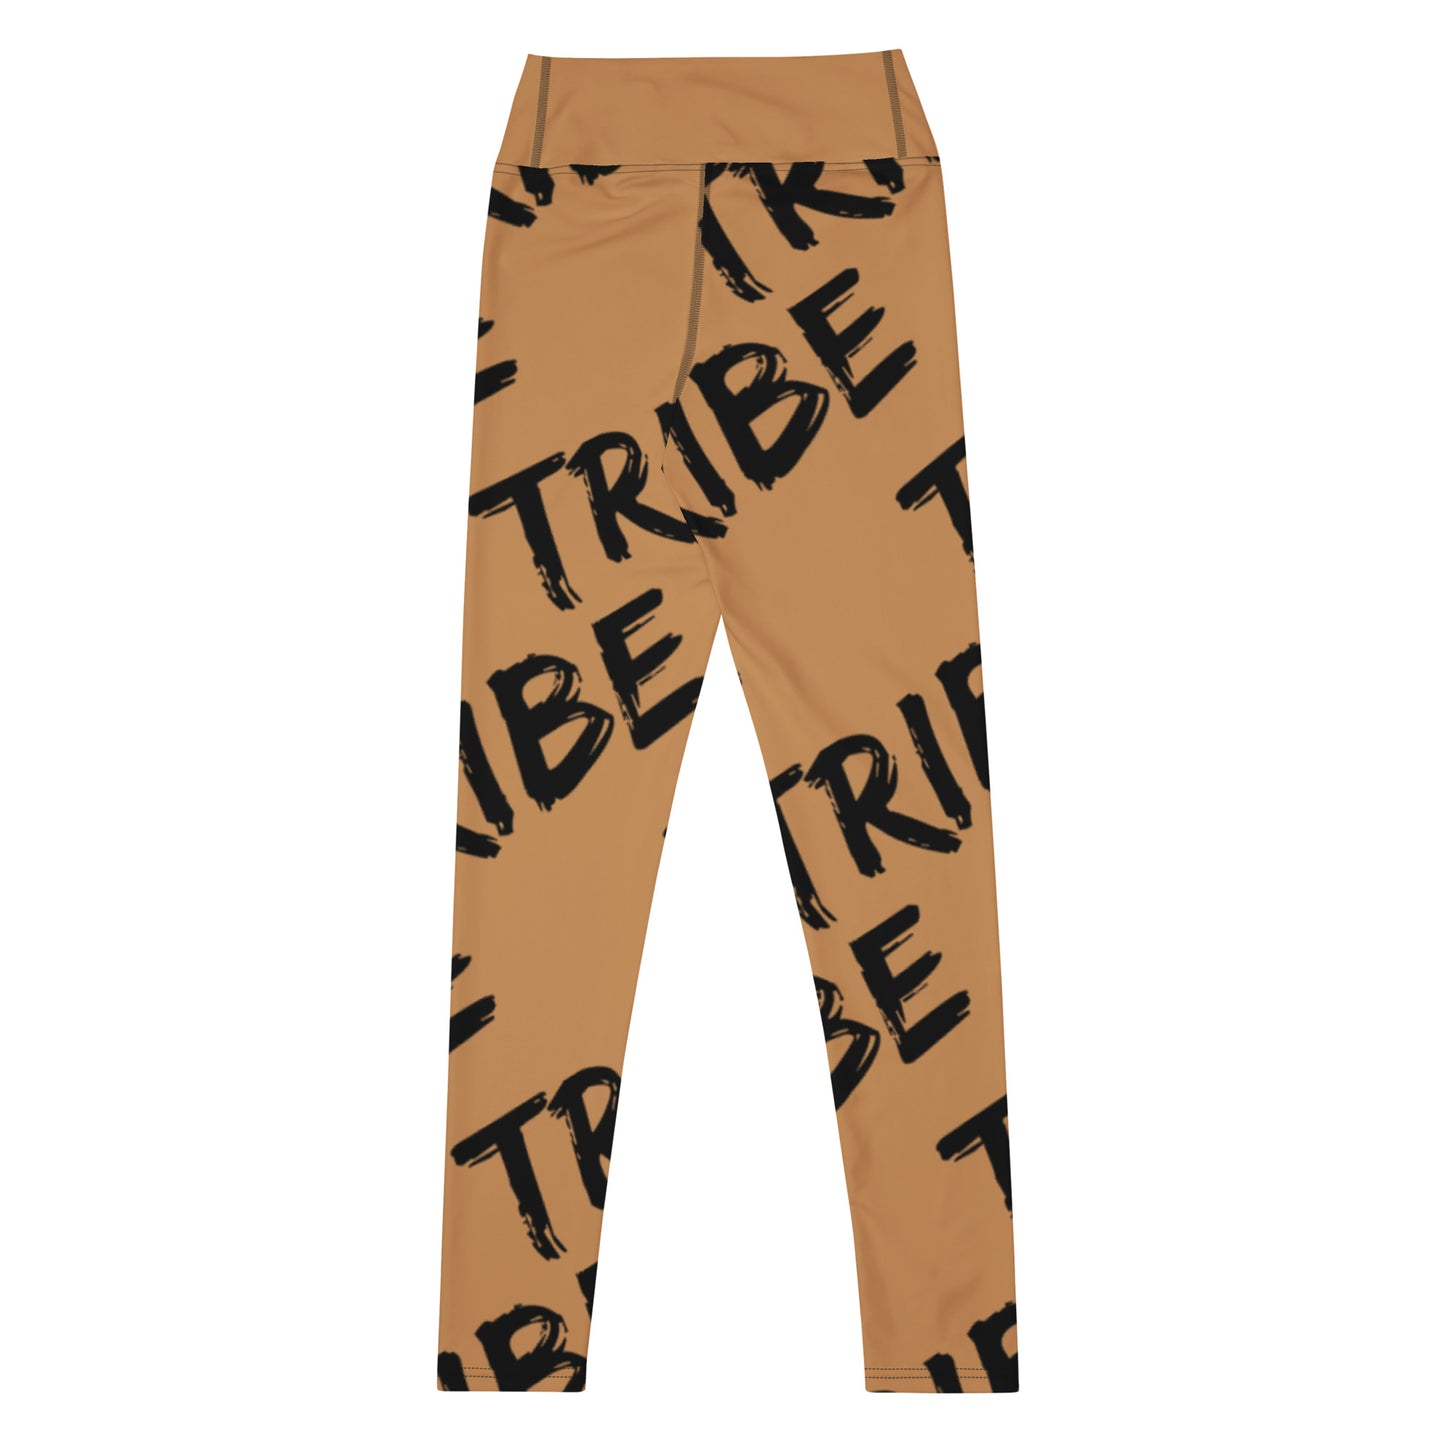 TRIBE ALL OVER LEGGINGS (nude)